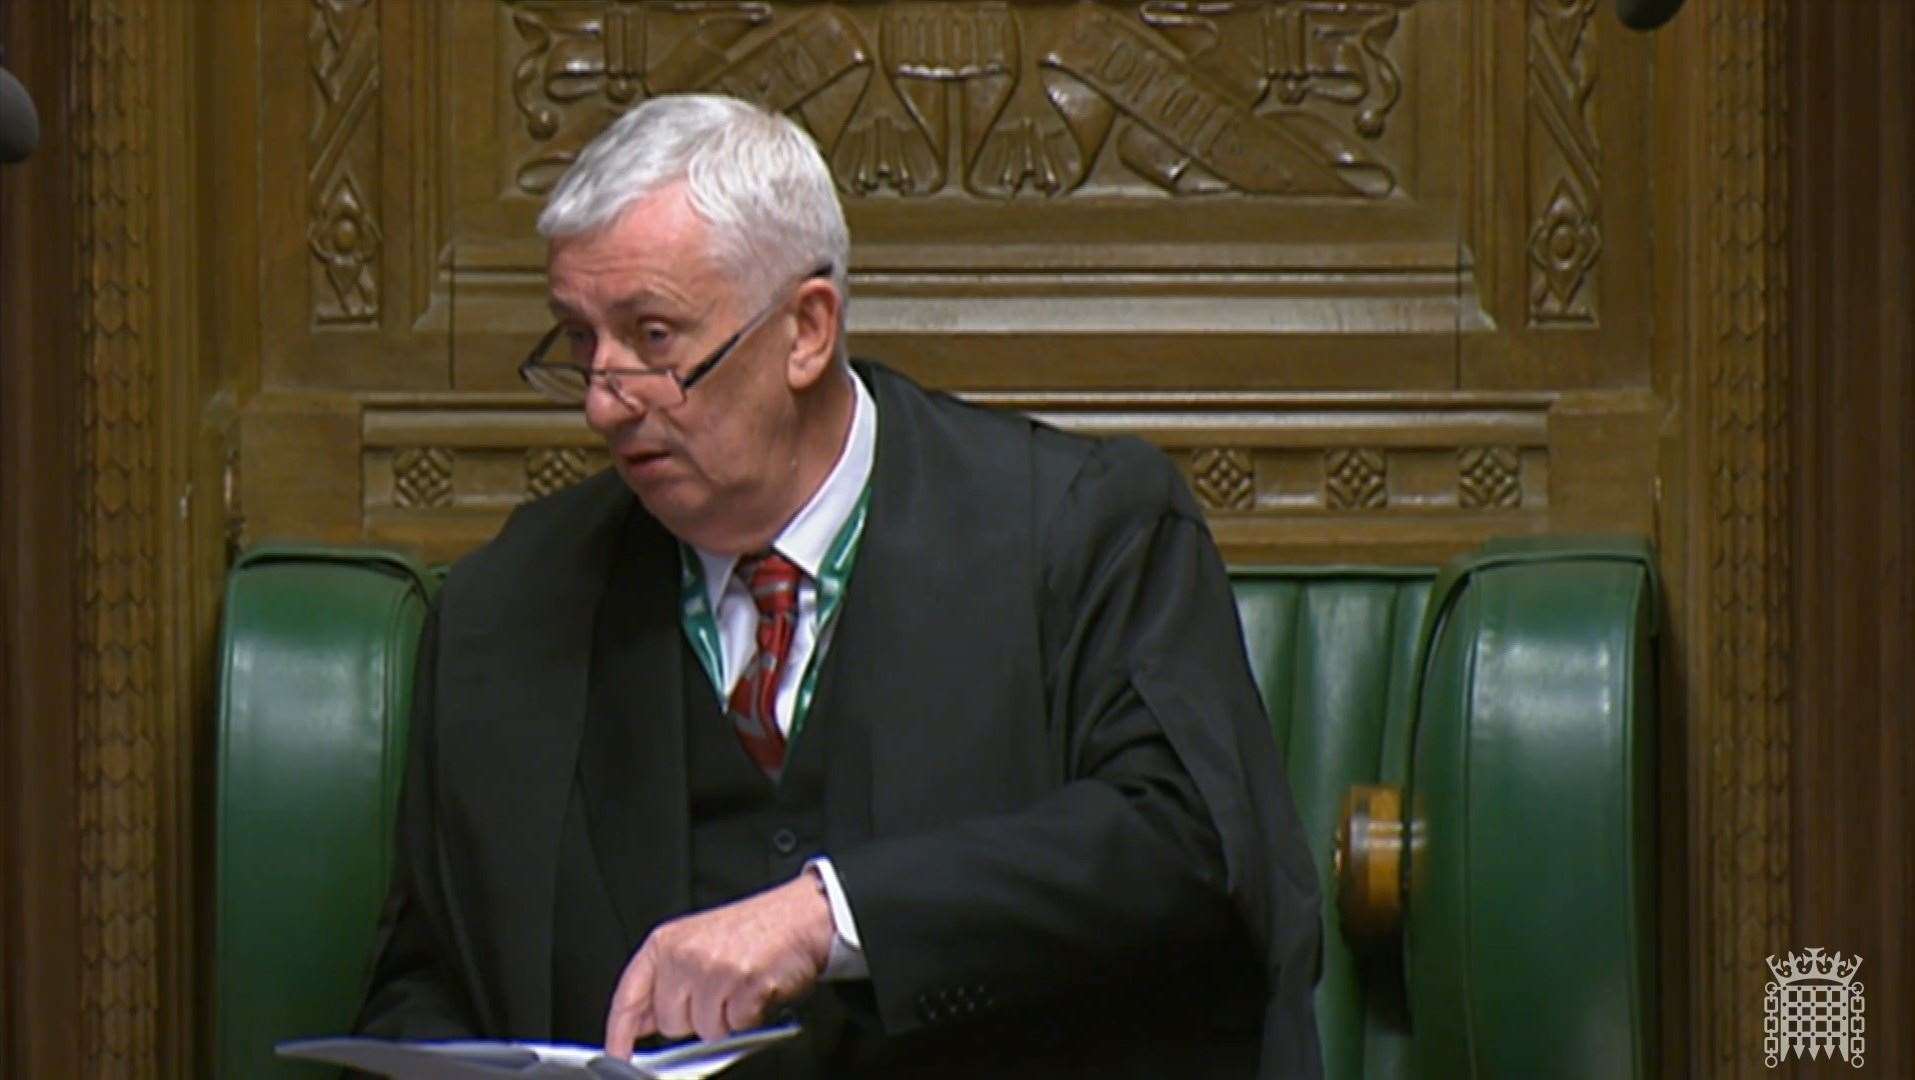 Speaker of the House of Commons Sir Lindsay Hoyle announces he has selected amendments tabled by Labour and the Government to the SNP’s Gaza ceasefire motion (House of Commons/UK Parliament/PA)